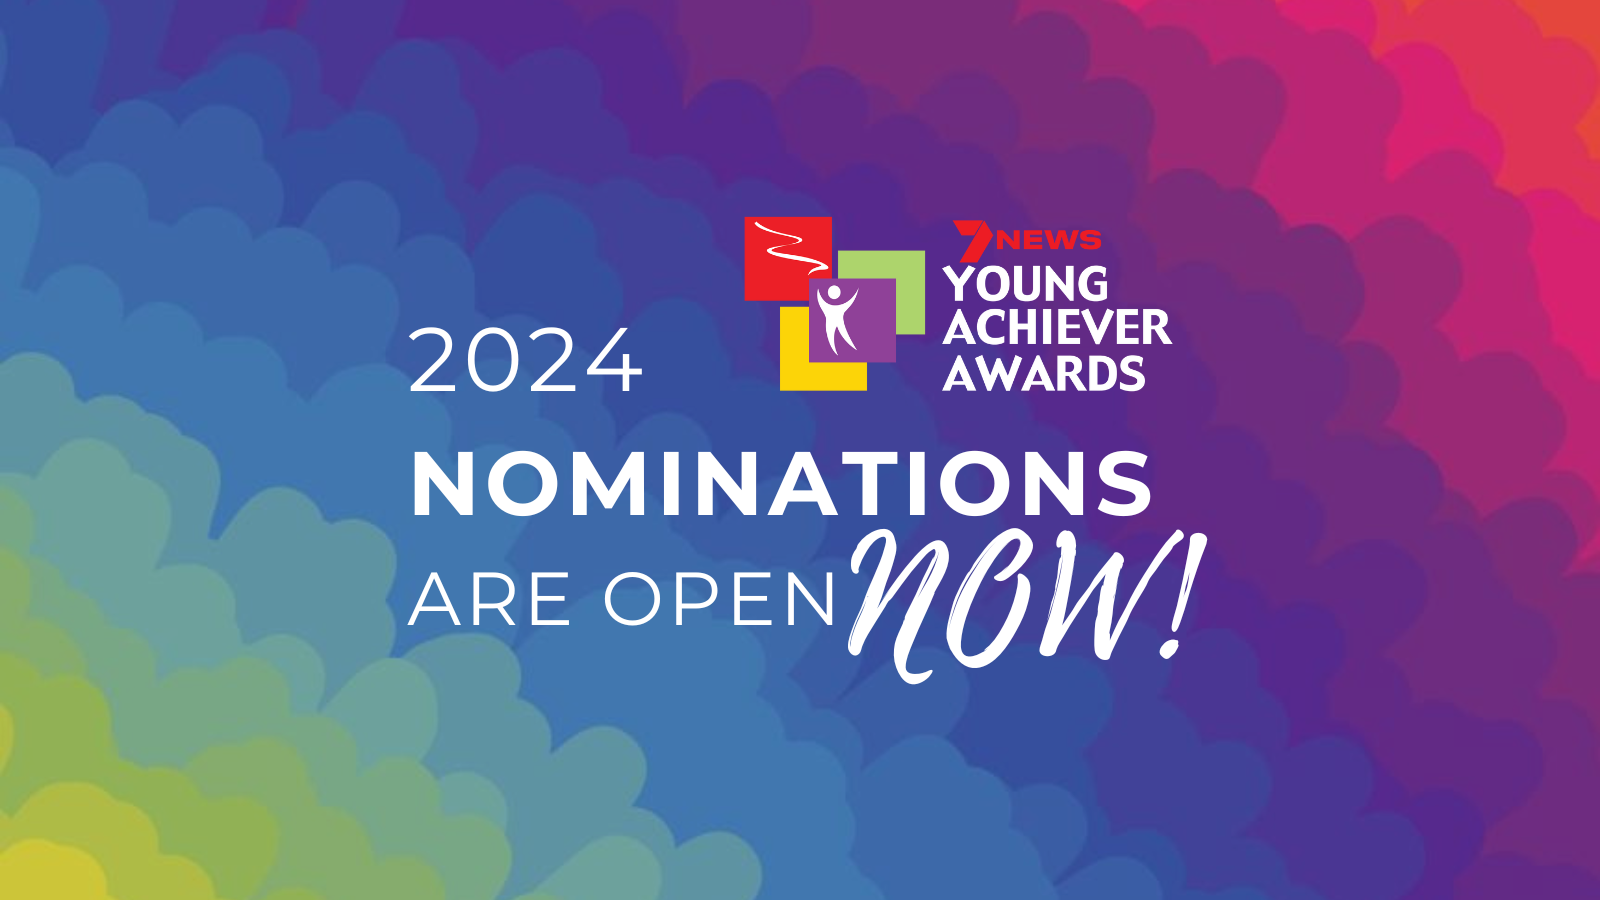 7News Young Achiever Awards 2024 Nominations are open now!